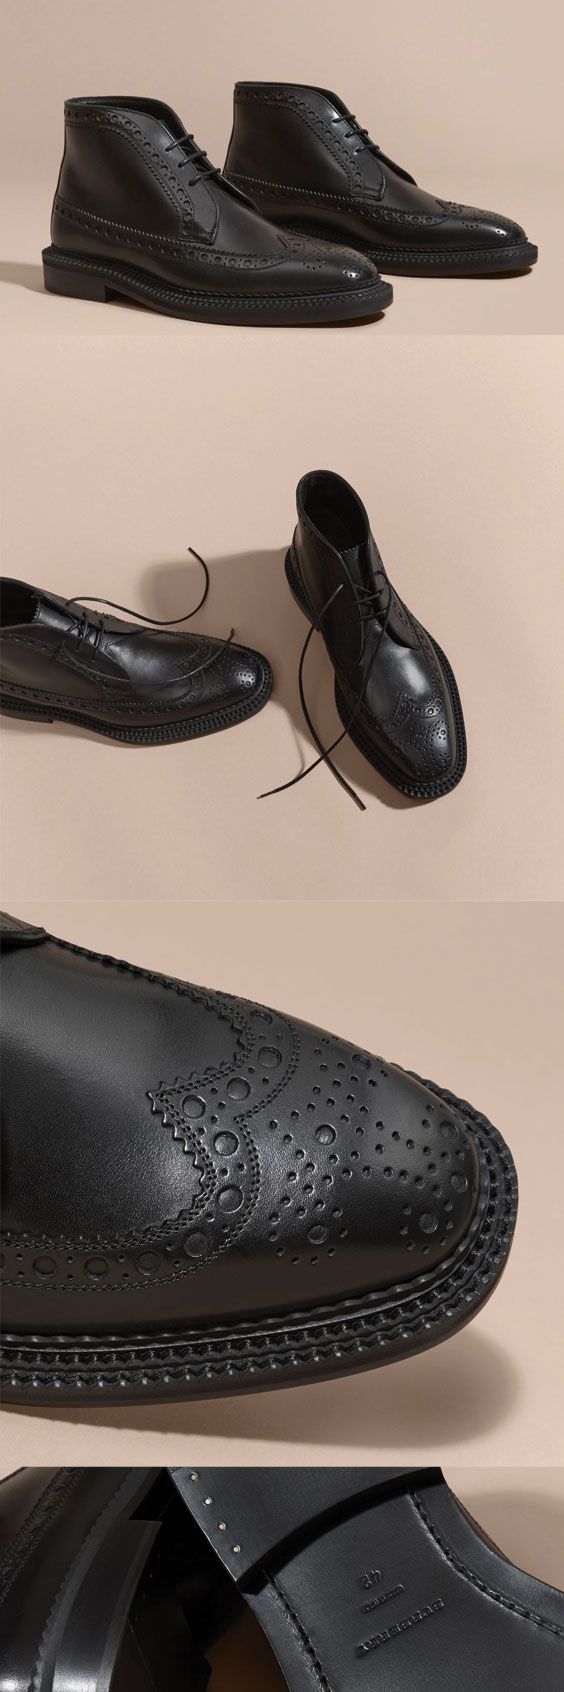 Burberry Leather Brogue Boots $825 #ads Men shoes boots...